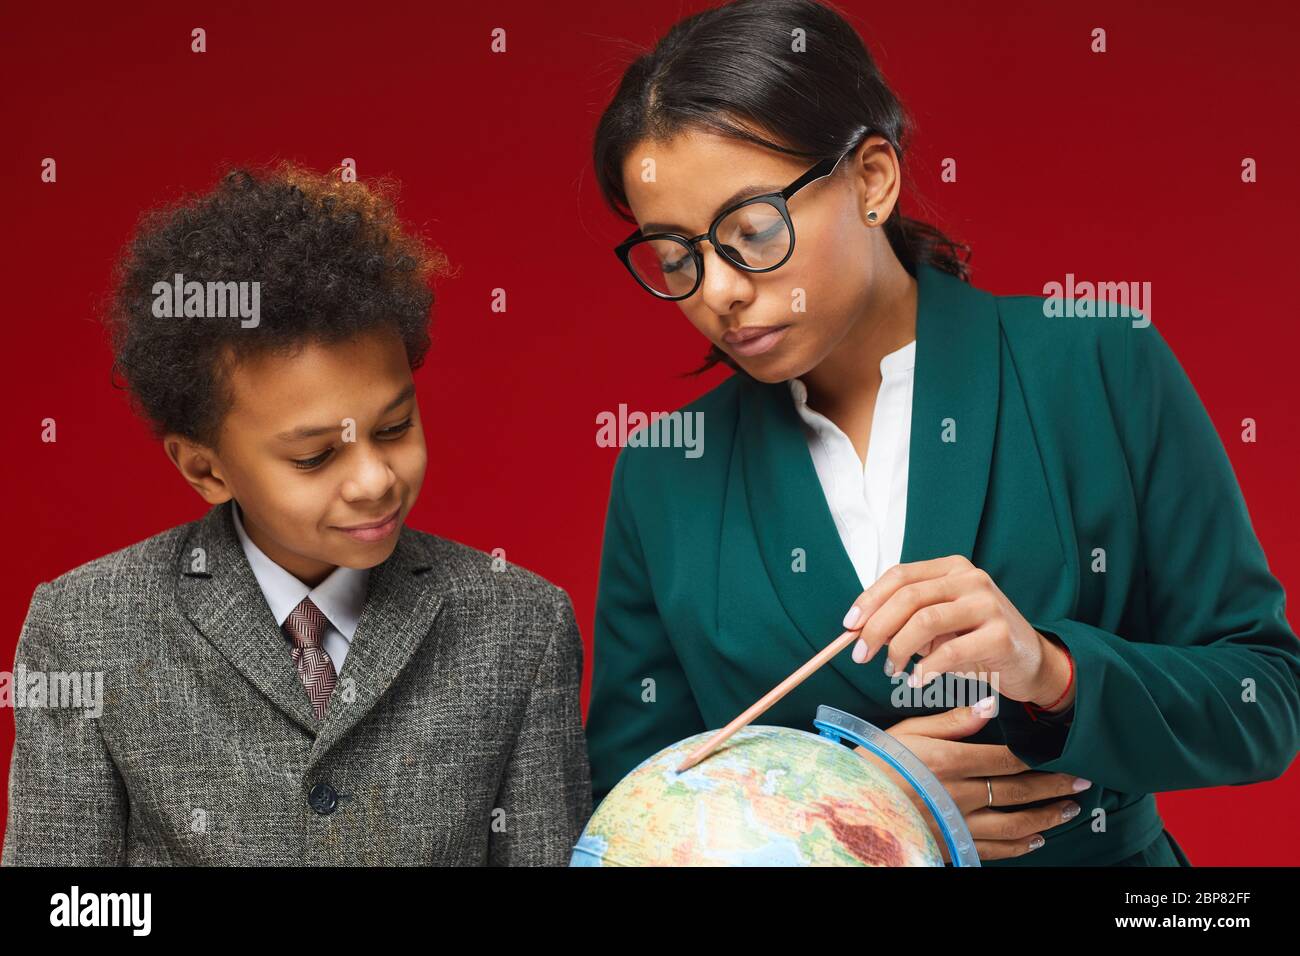 Close up portrait of young female teacher and cute African-American boy looking at geographical globe while standing against red background Stock Photo